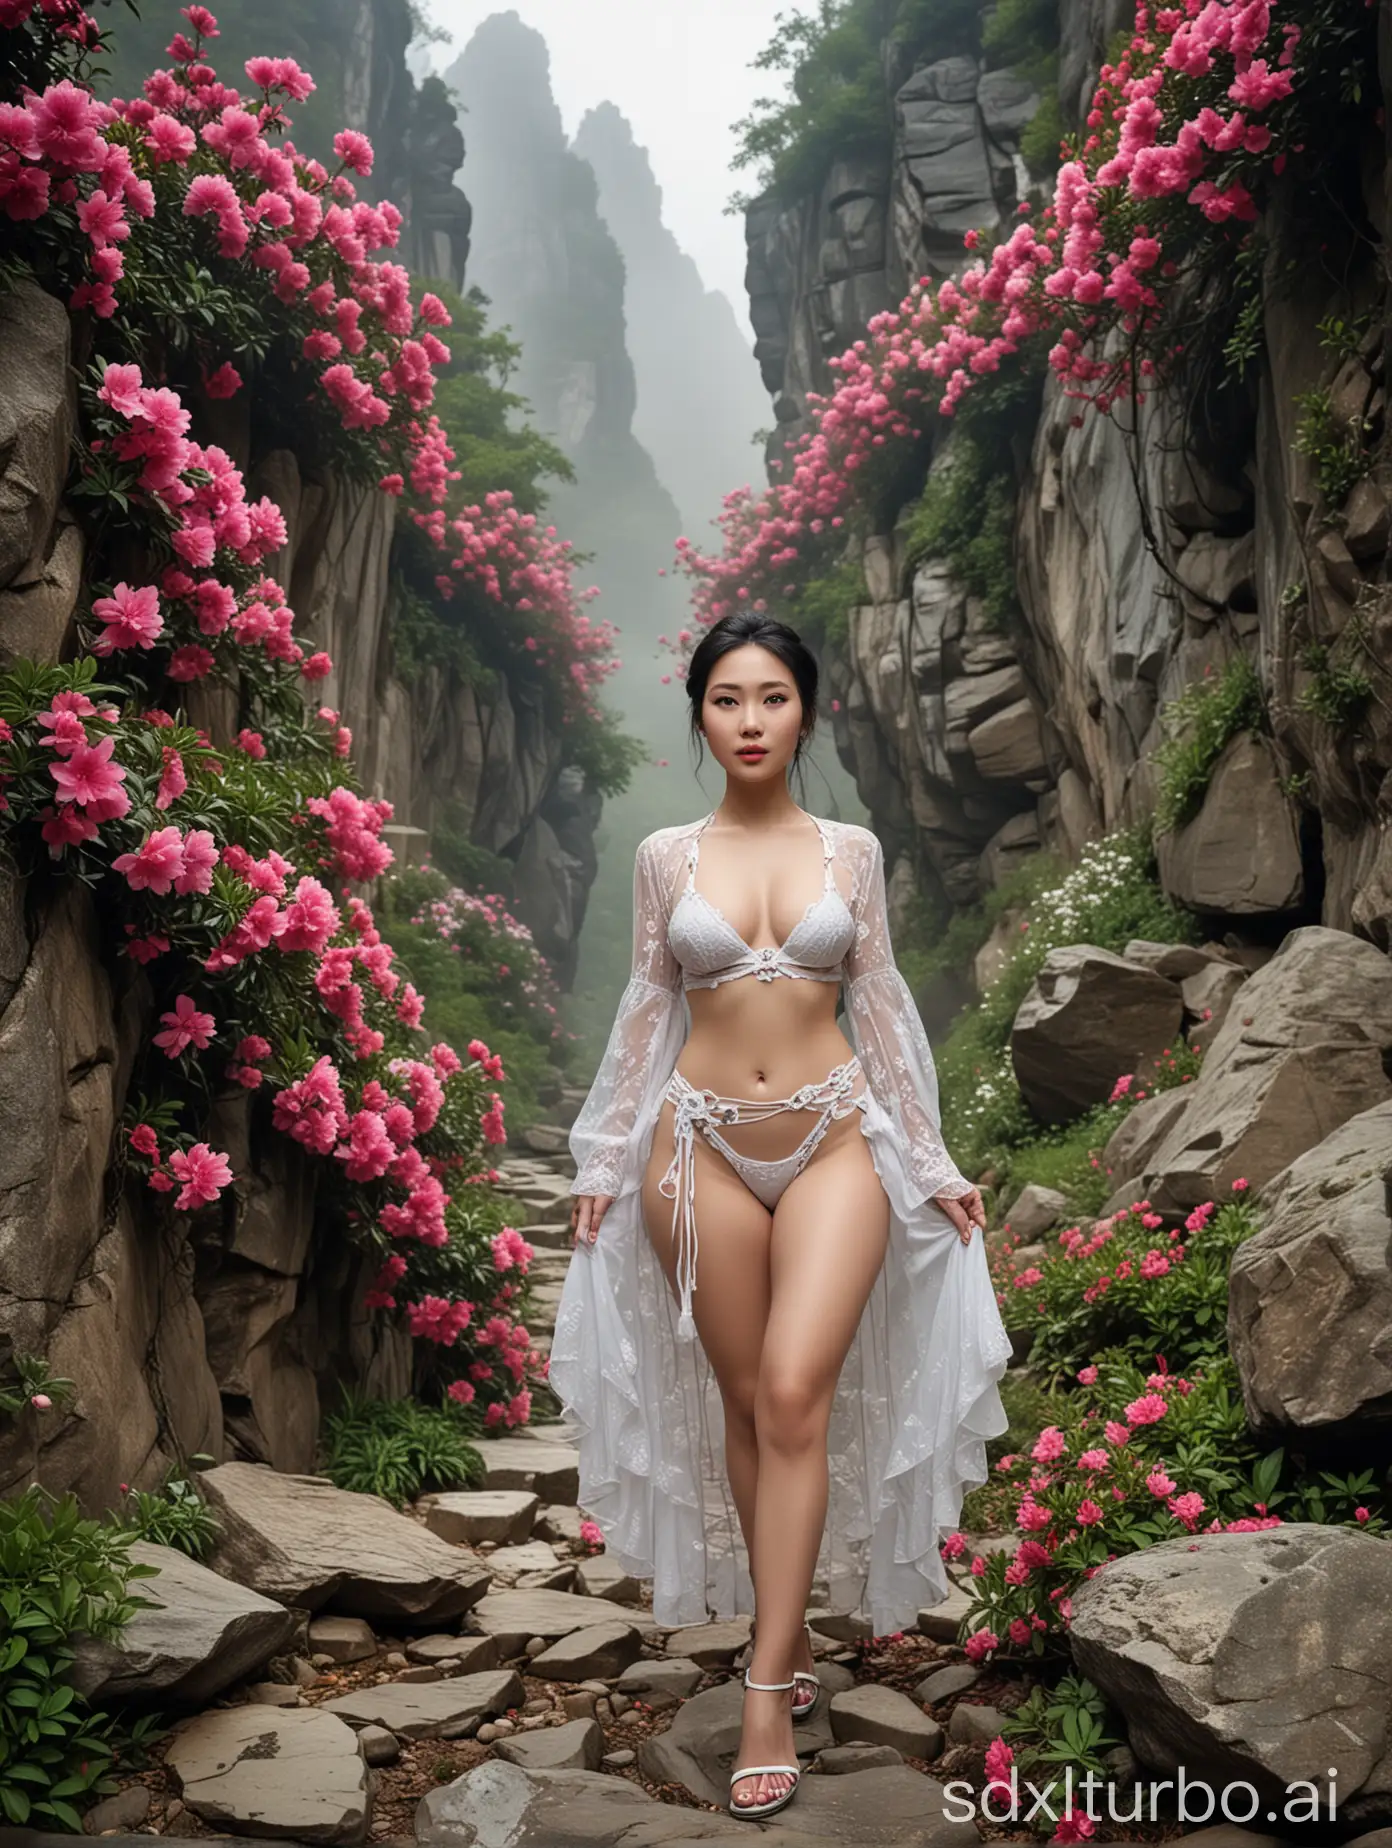 Captivating-Chinese-Woman-in-Mountain-Gorge-Amidst-Blossoming-Azaleas-and-Pear-Flowers